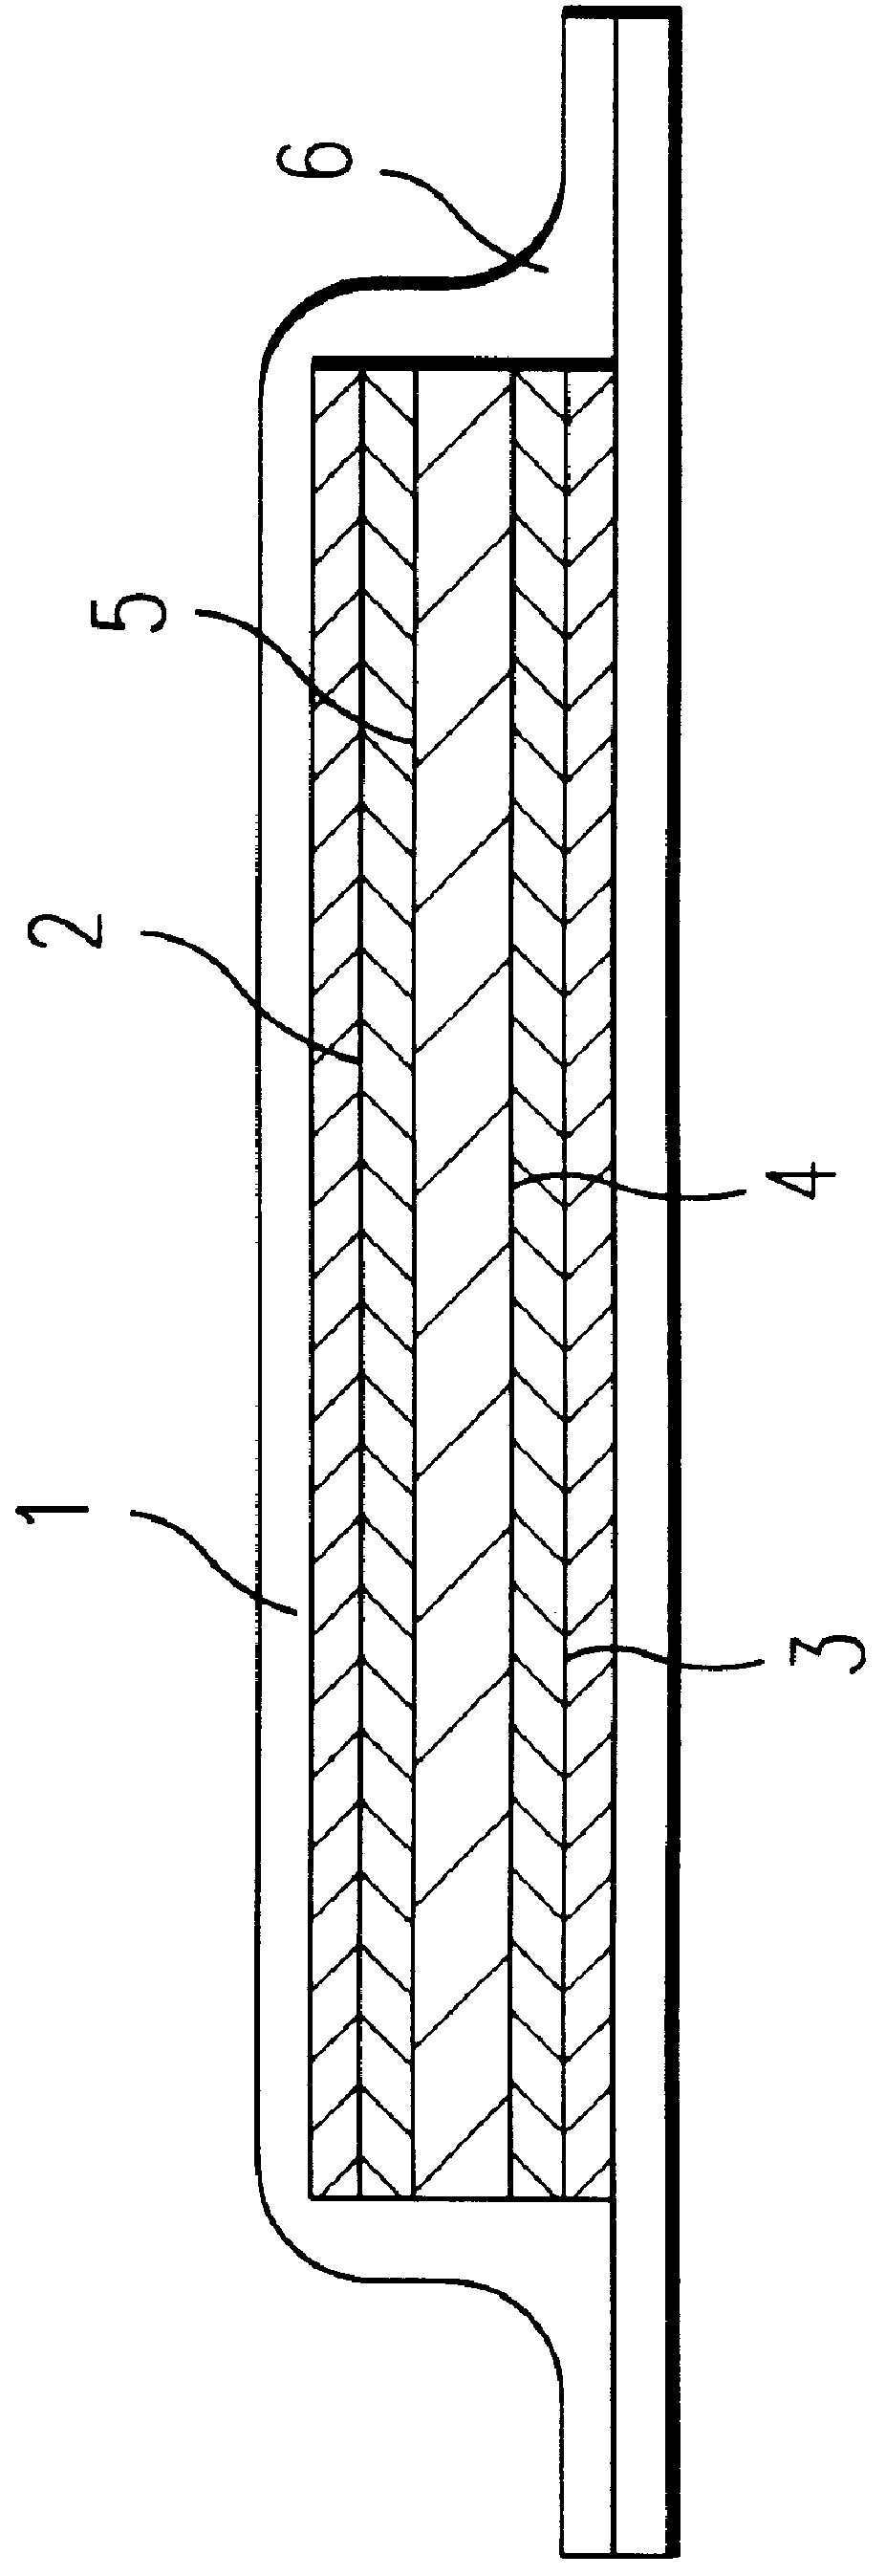 Sheet for forming a polymer gelled electrolyte, a polymer gelled electrolyte using it, and a method for manufacture thereof